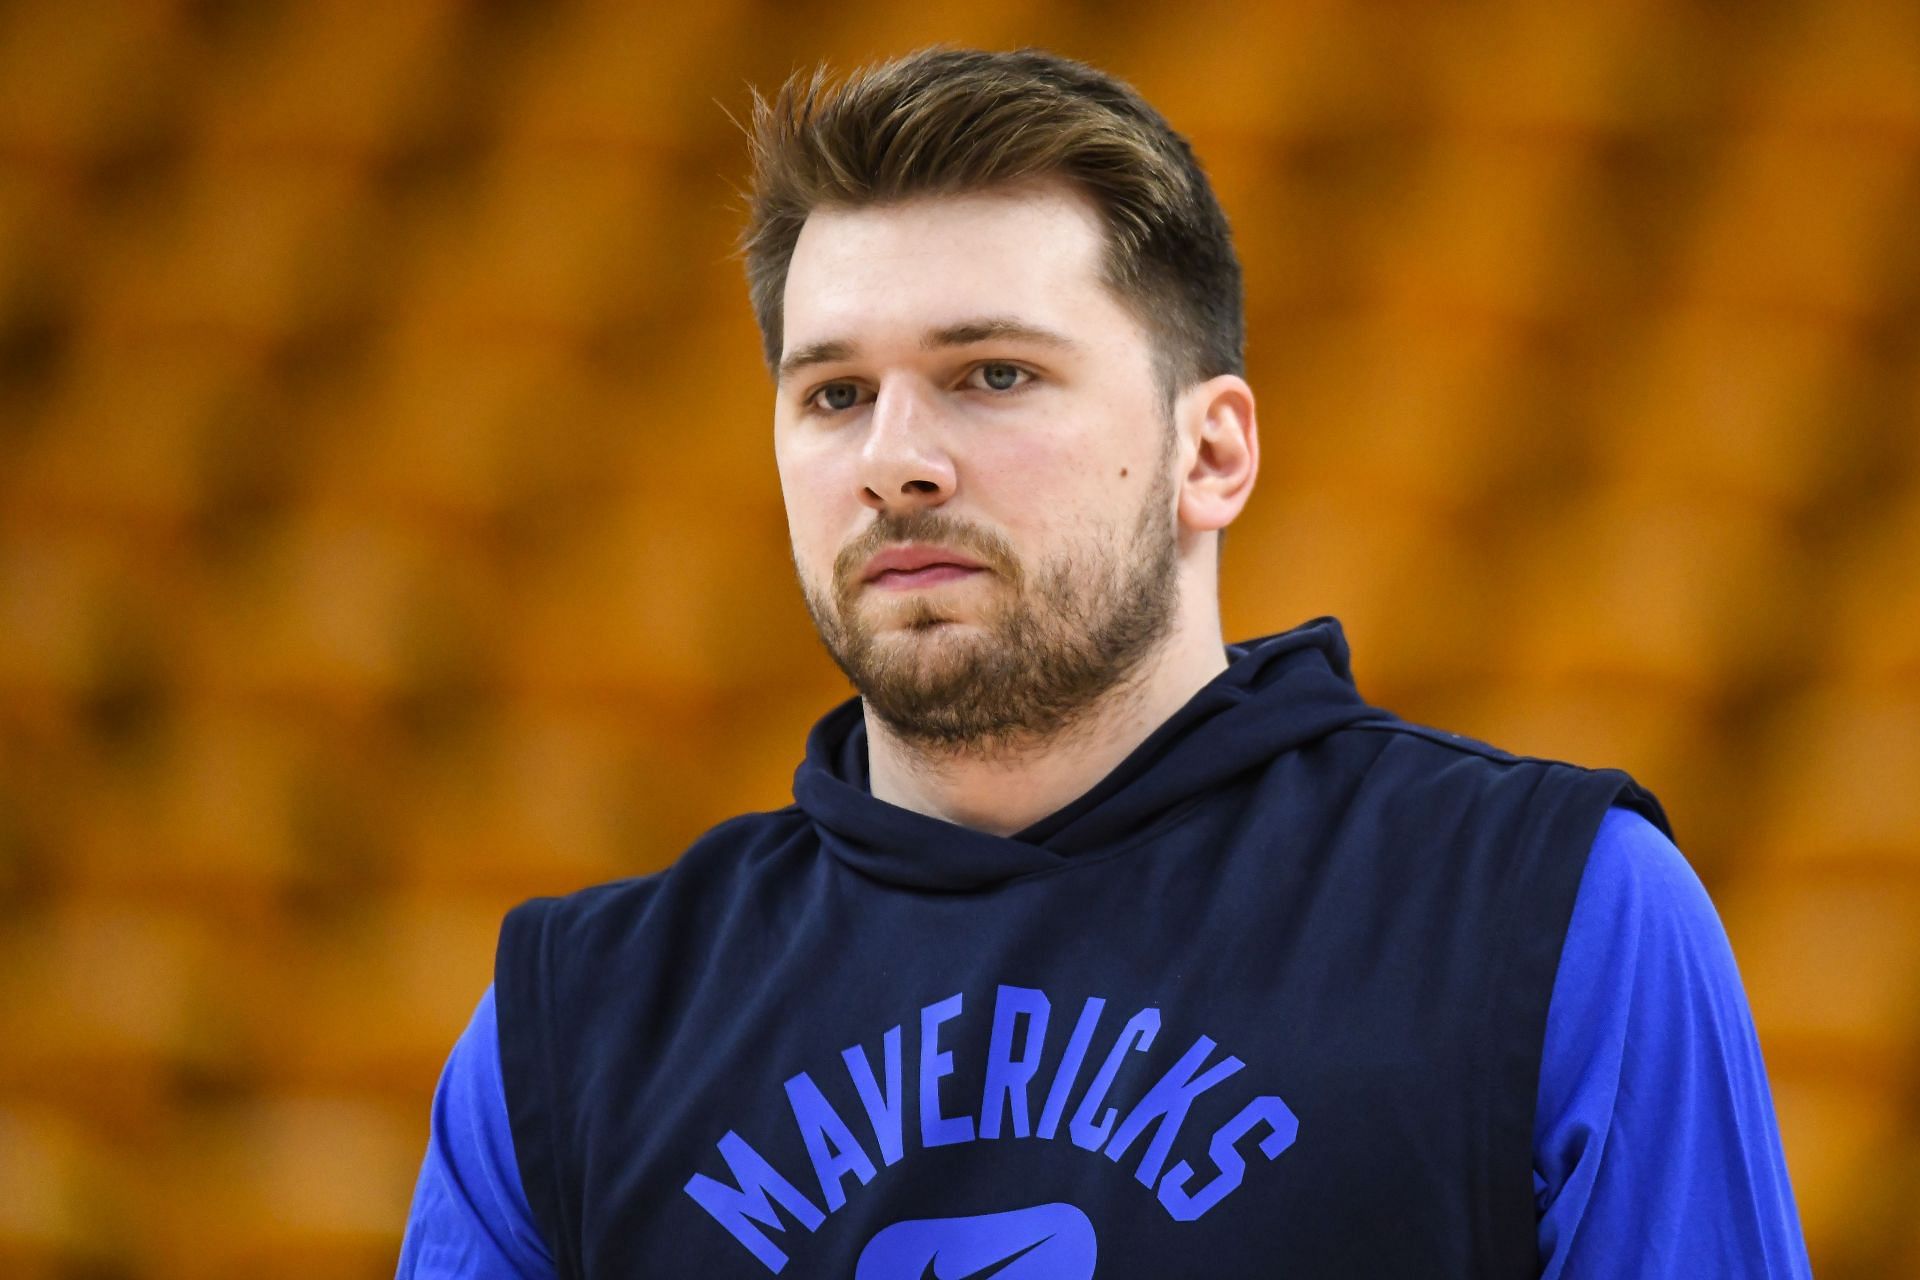 Luka Dončić No. 77 of the Dallas Mavericks looks on before Game 3 of the Western Conference First Round Playoffs against the Utah Jazz.